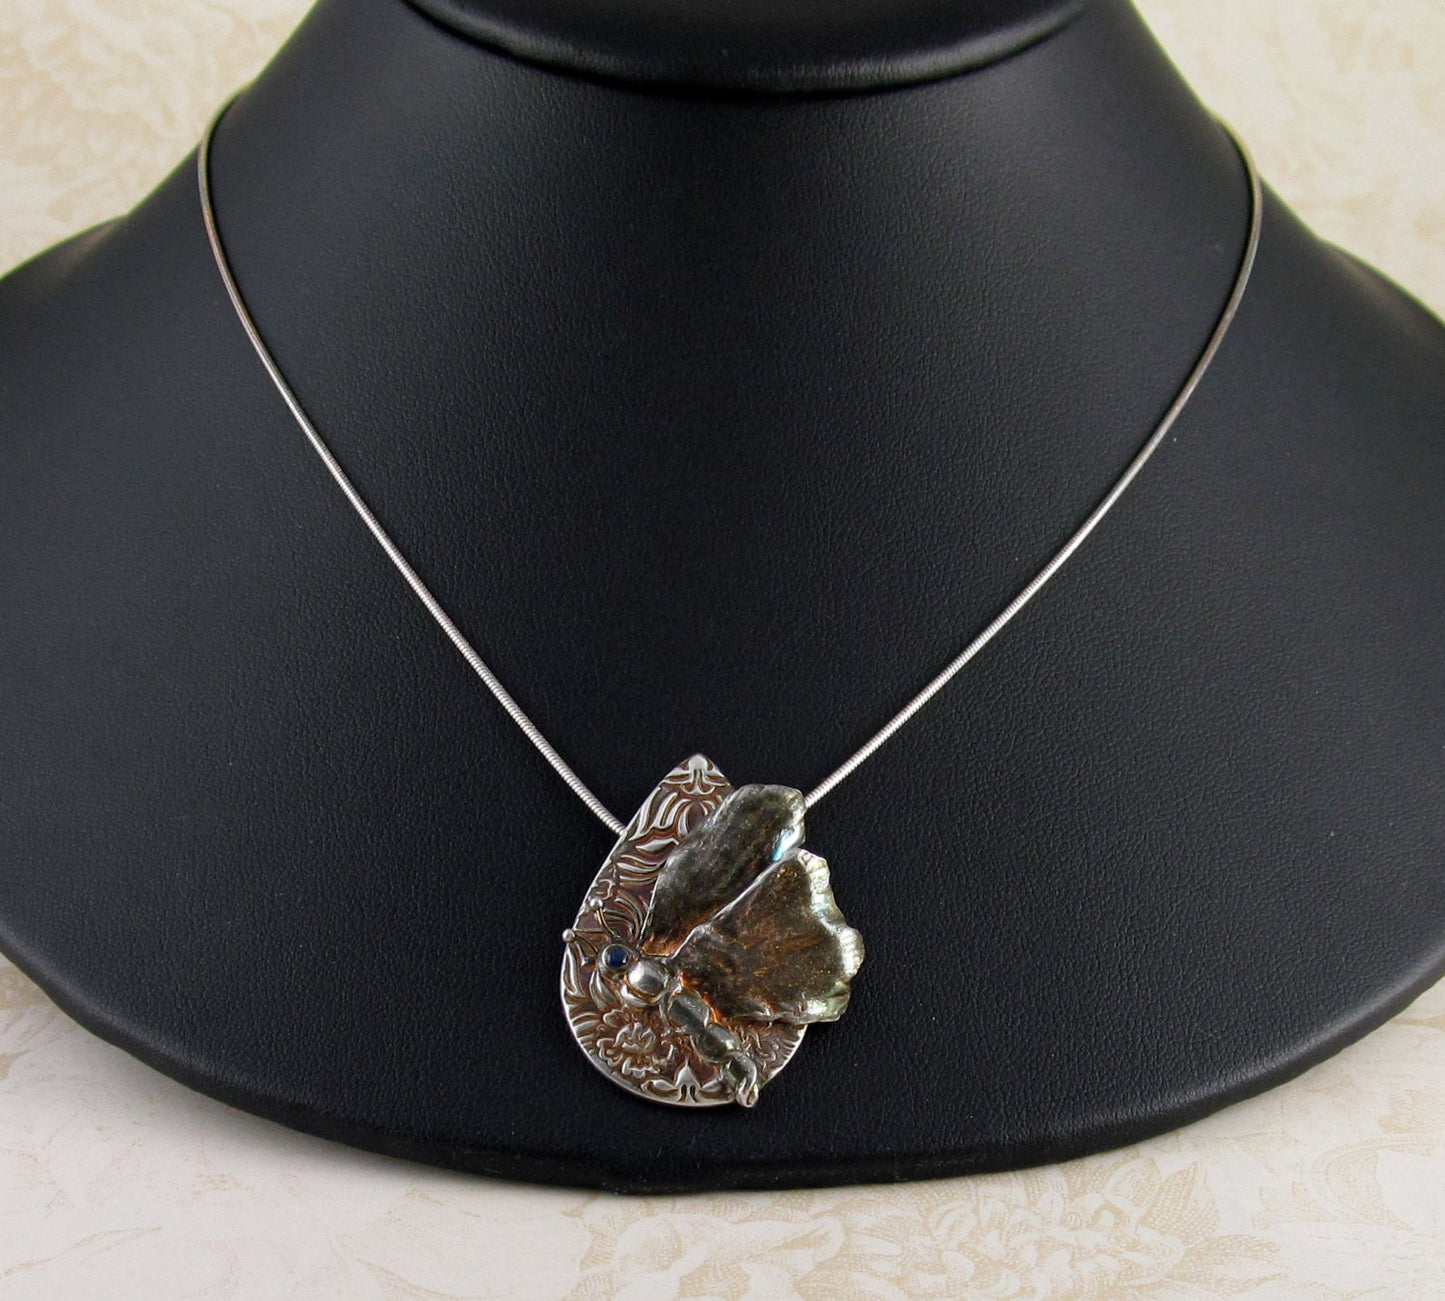 Silver dragonfly pendant, handmade recycled fine silver gingko leaf dragonfly # 2 with blue sapphire-OOAK